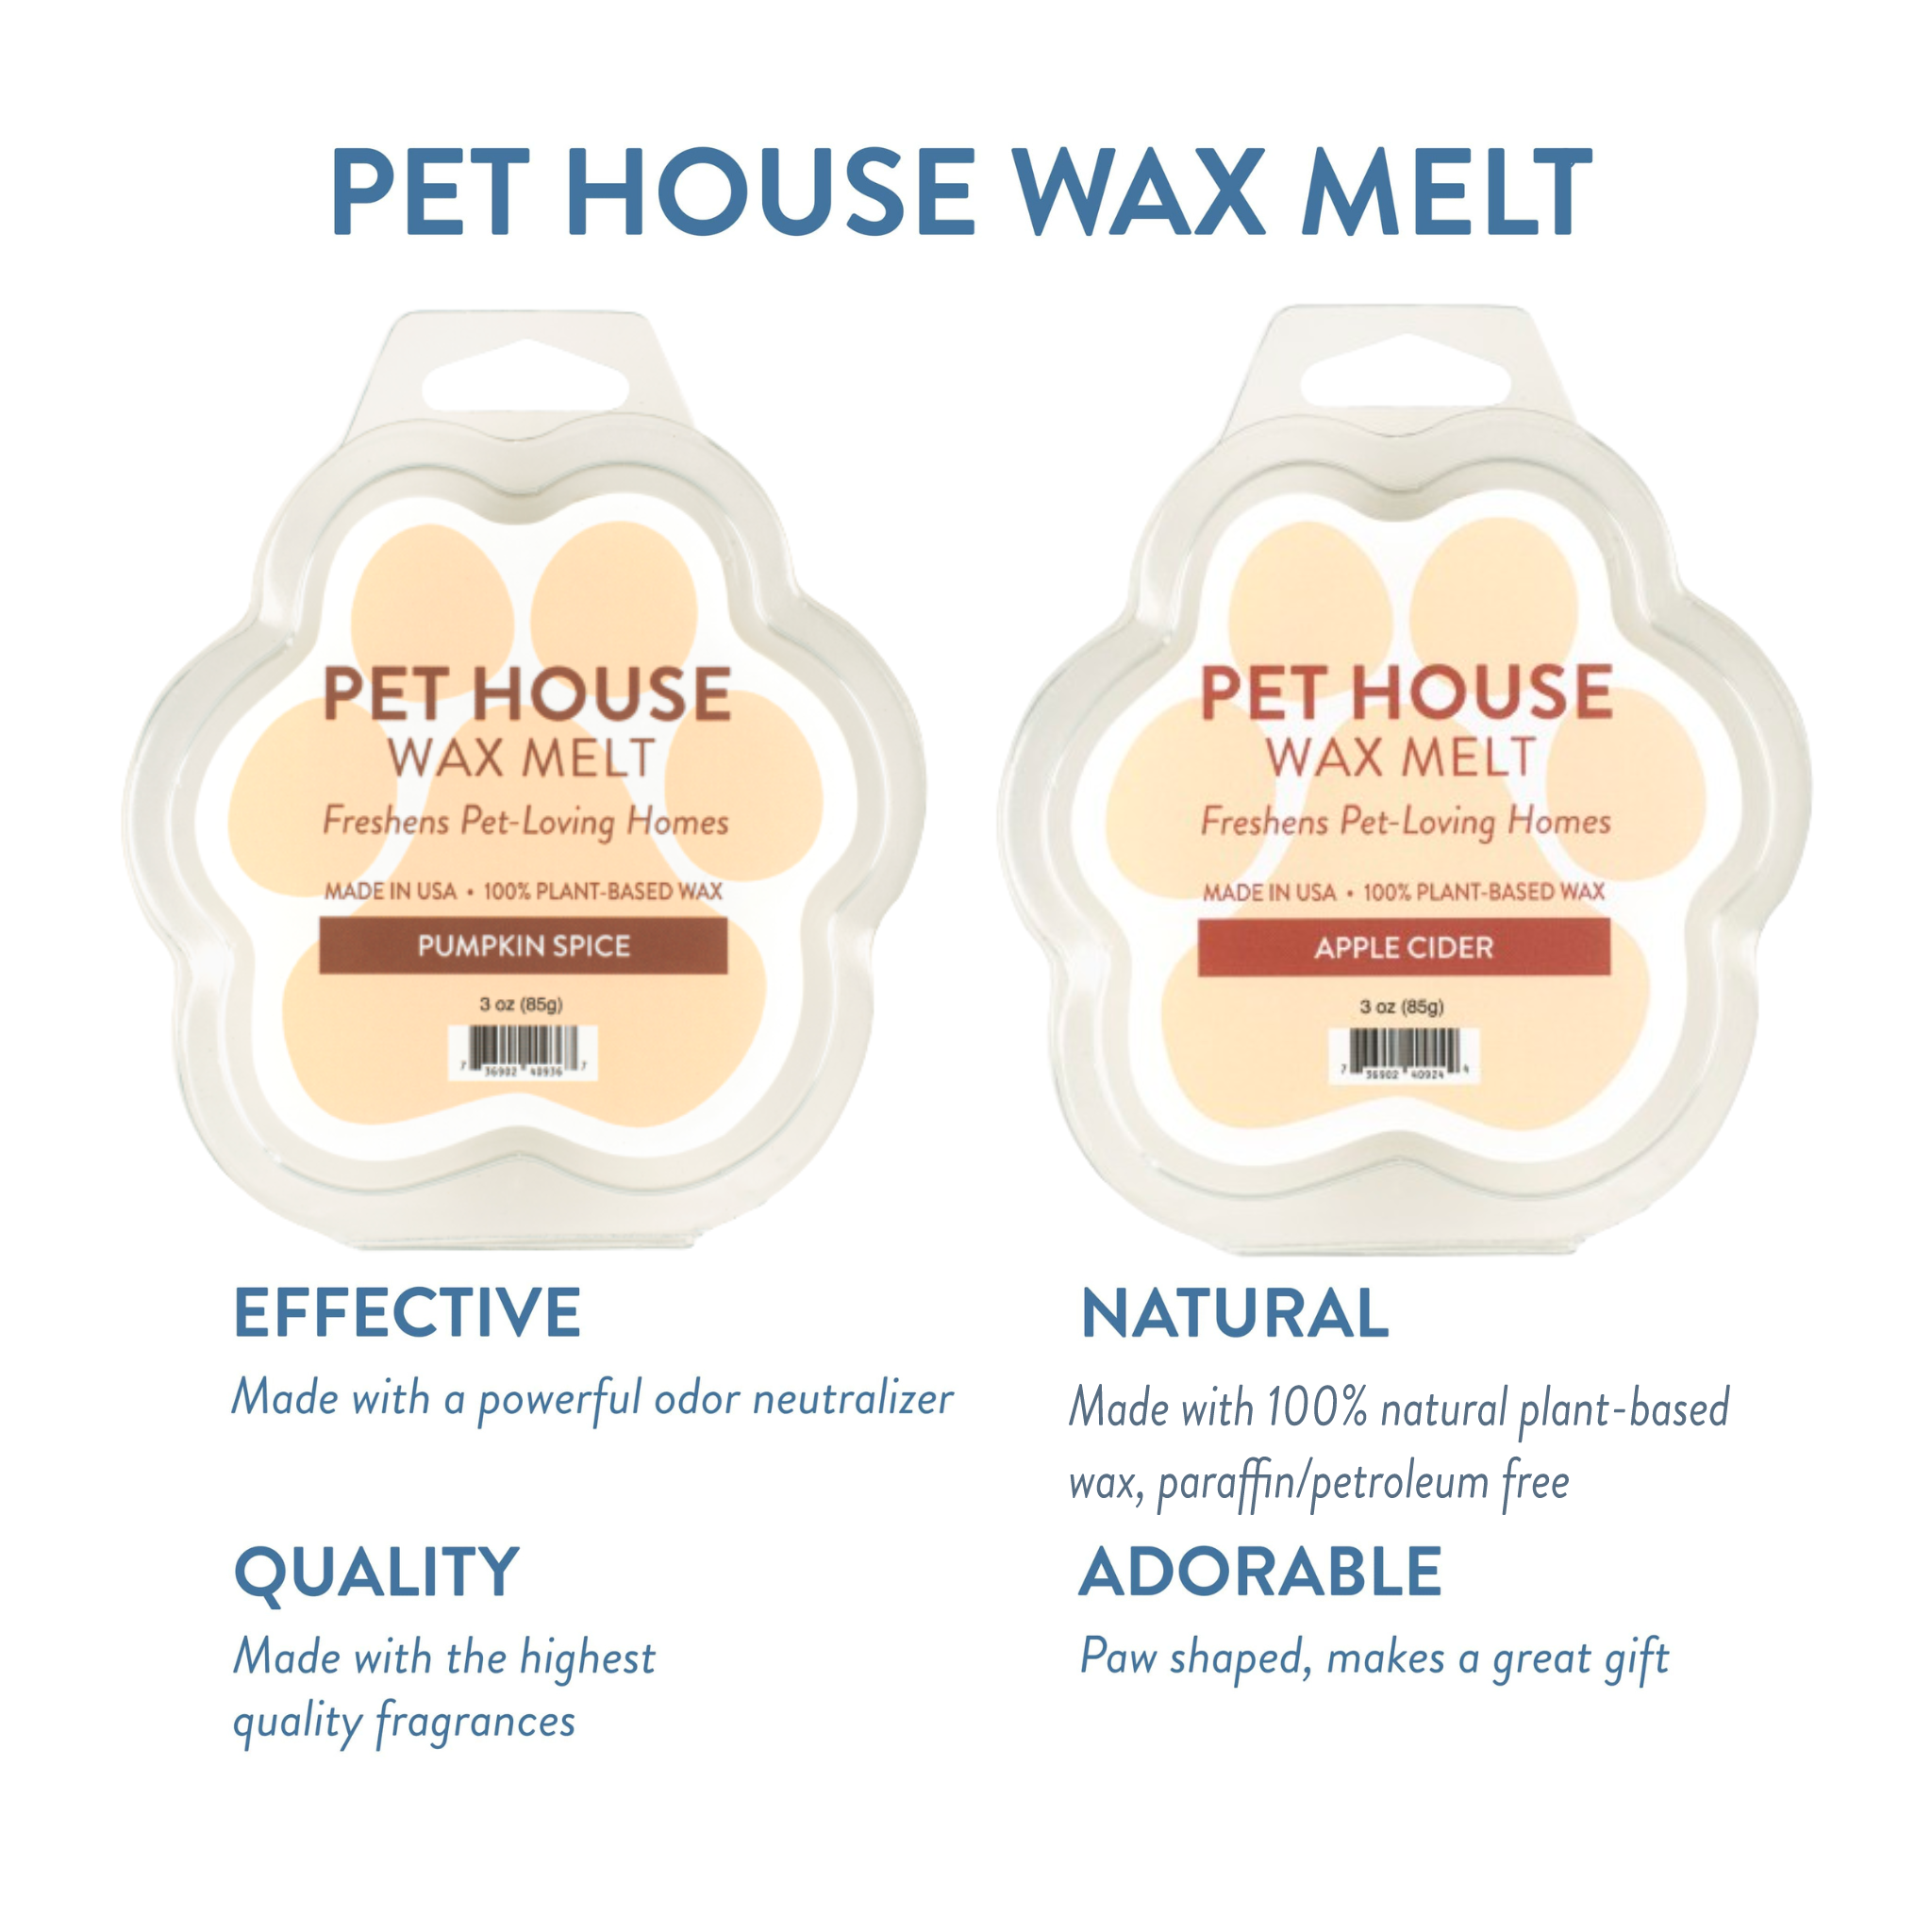 Pumpkin Spice and Apple Cider - Pack of 2 Wax Melts infographics